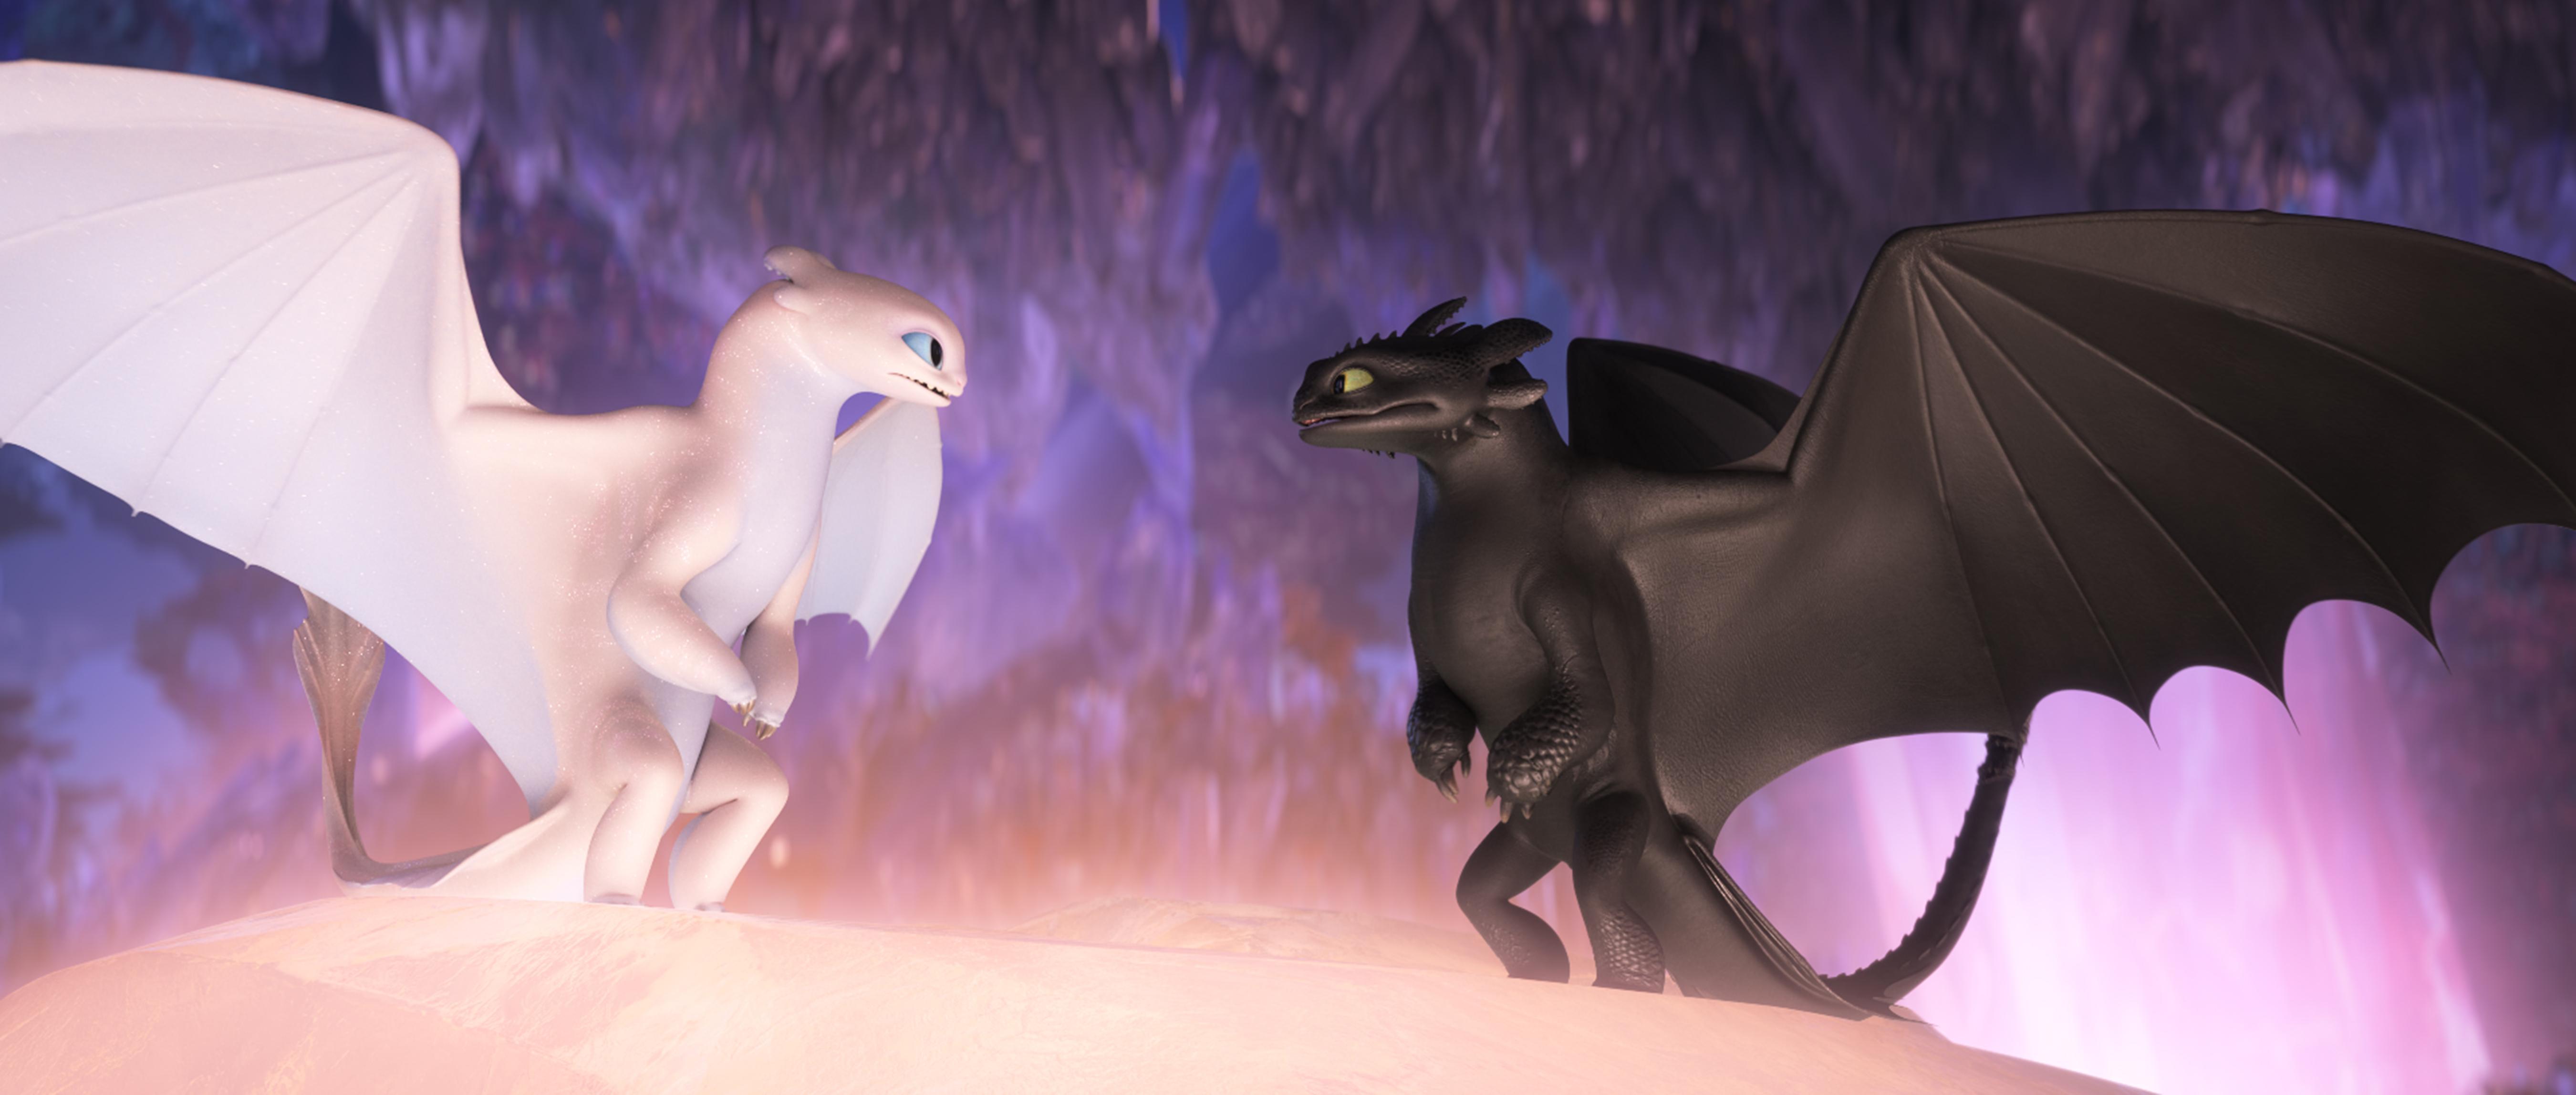 How to Train Your Dragon 3: Meet The Hidden World's new